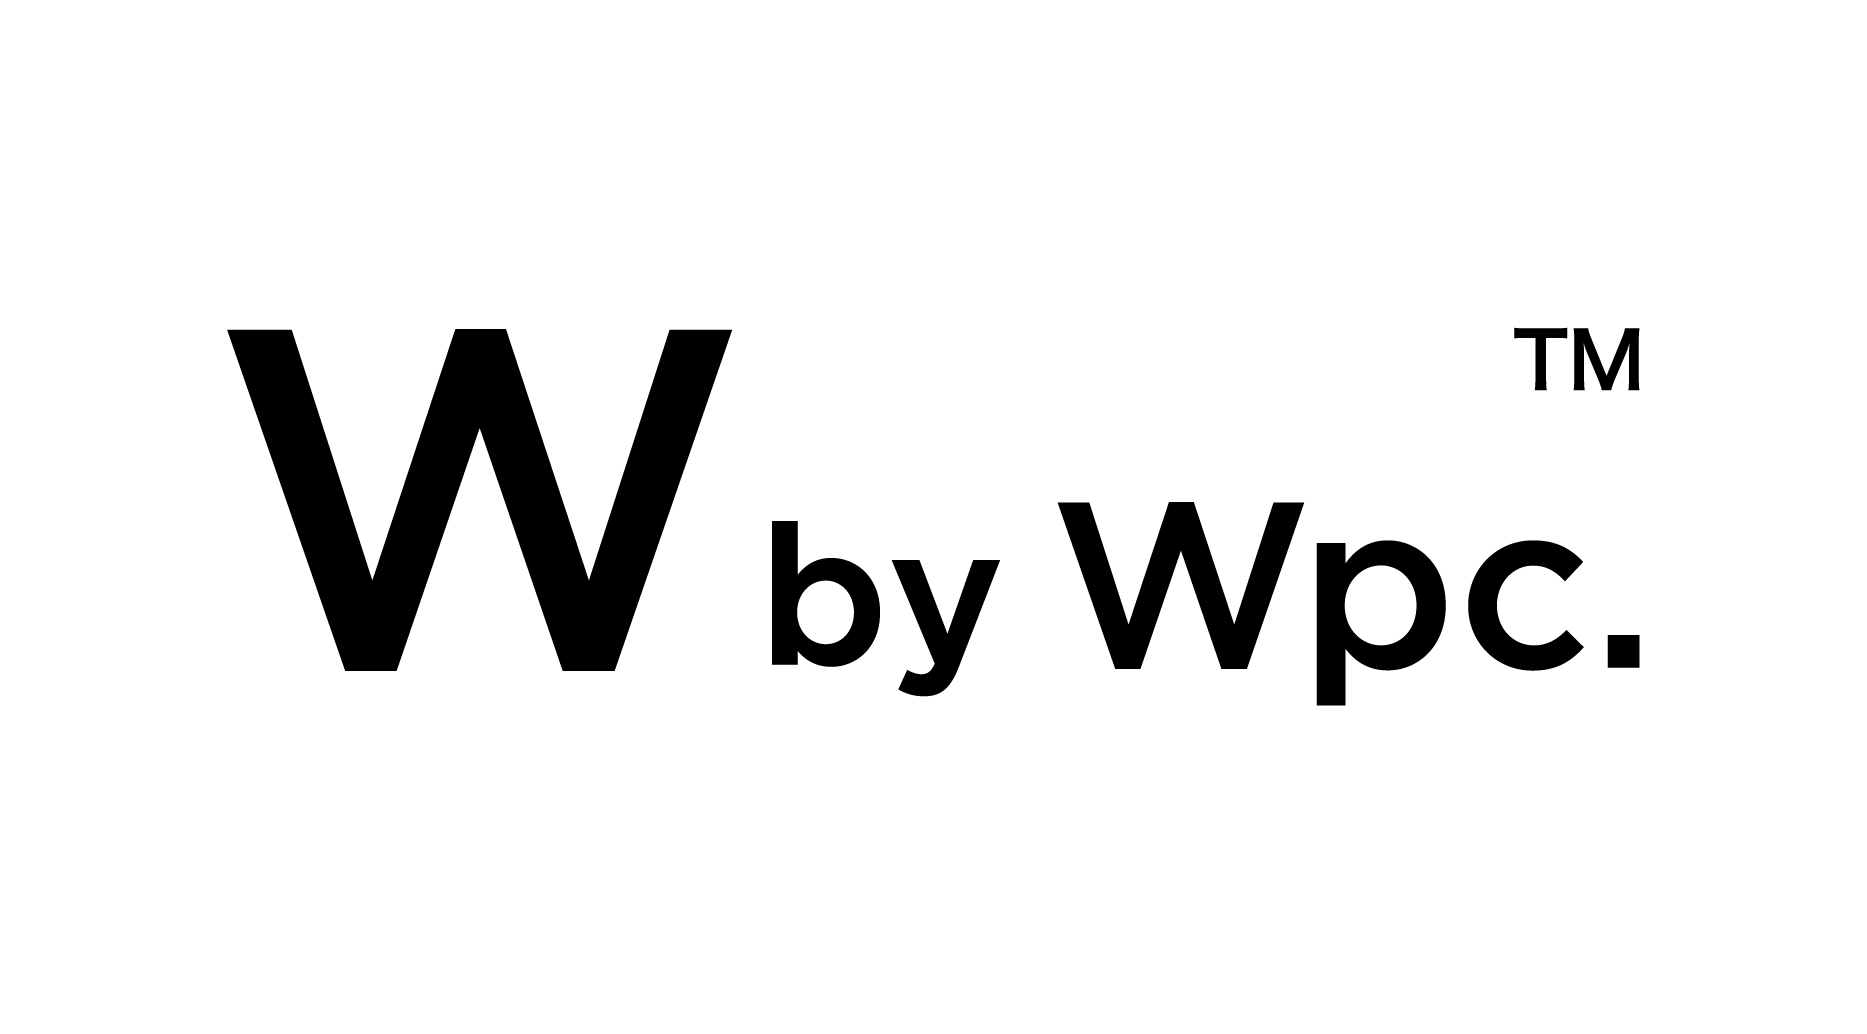 W by Wpc.